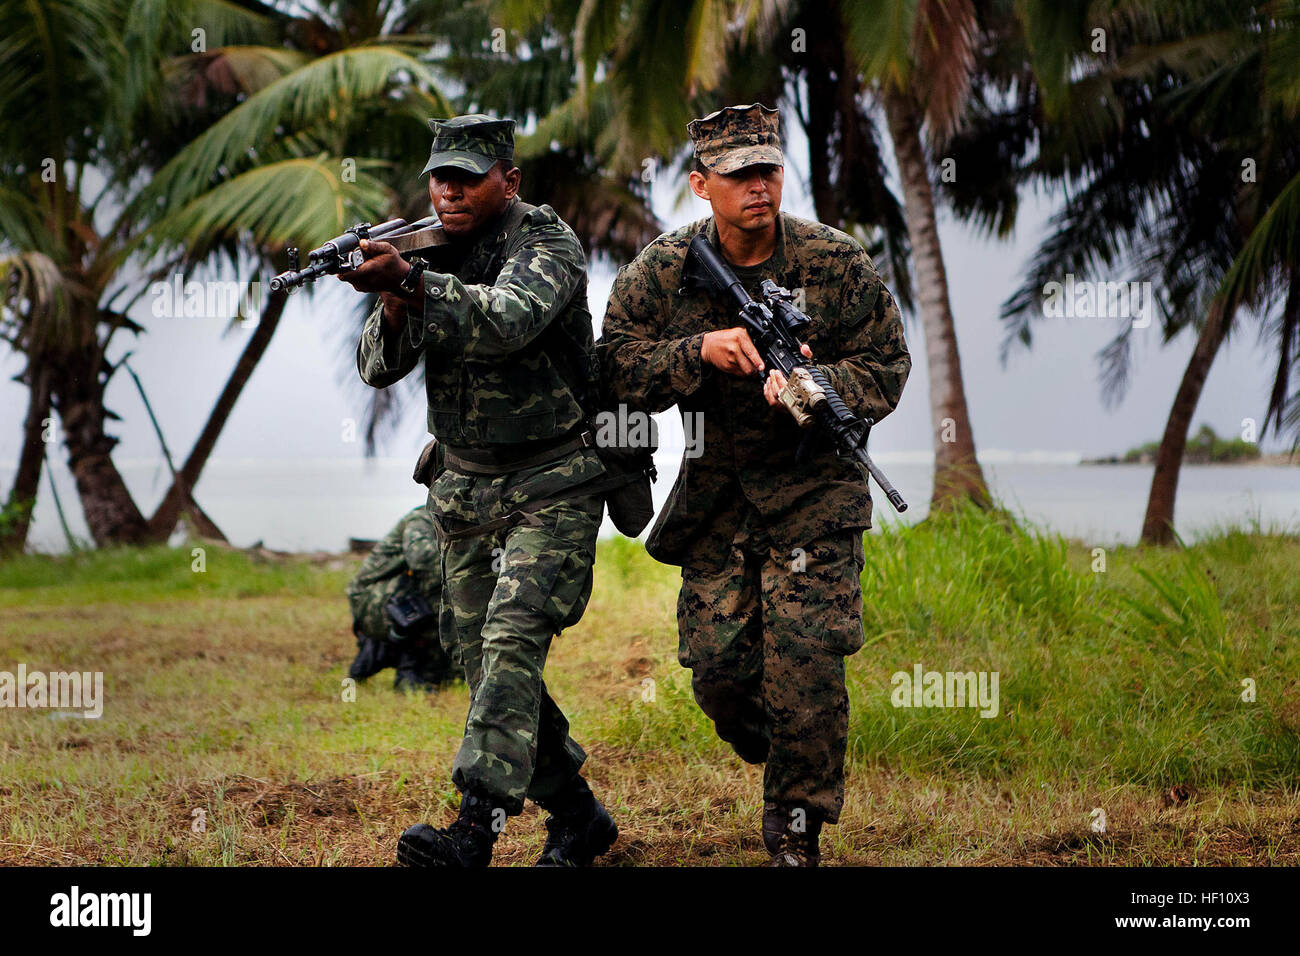 Maldivian marine corps Lance Cpl. Adam Haleem, left, a rifleman, and U.S. Marine Corps Sgt. Sergio Zacarias, a squad leader with Alpha Company, 1st Battalion, 4th Marine Regiment, run to their rally point during accountability training as part of exercise Coconut Grove 2012 in Gan, Maldives, Oct. 9, 2012. Coconut Grove is a bilateral exercise designed to increase interoperability and hone small-unit skills between the U.S. Marine Corps and the Maldivian Marine Corps. (DoD photo by Cpl. Isis Ramirez, U.S. Marine Corps/Released) 121009-M-UV915-184 (8090656758) Stock Photo